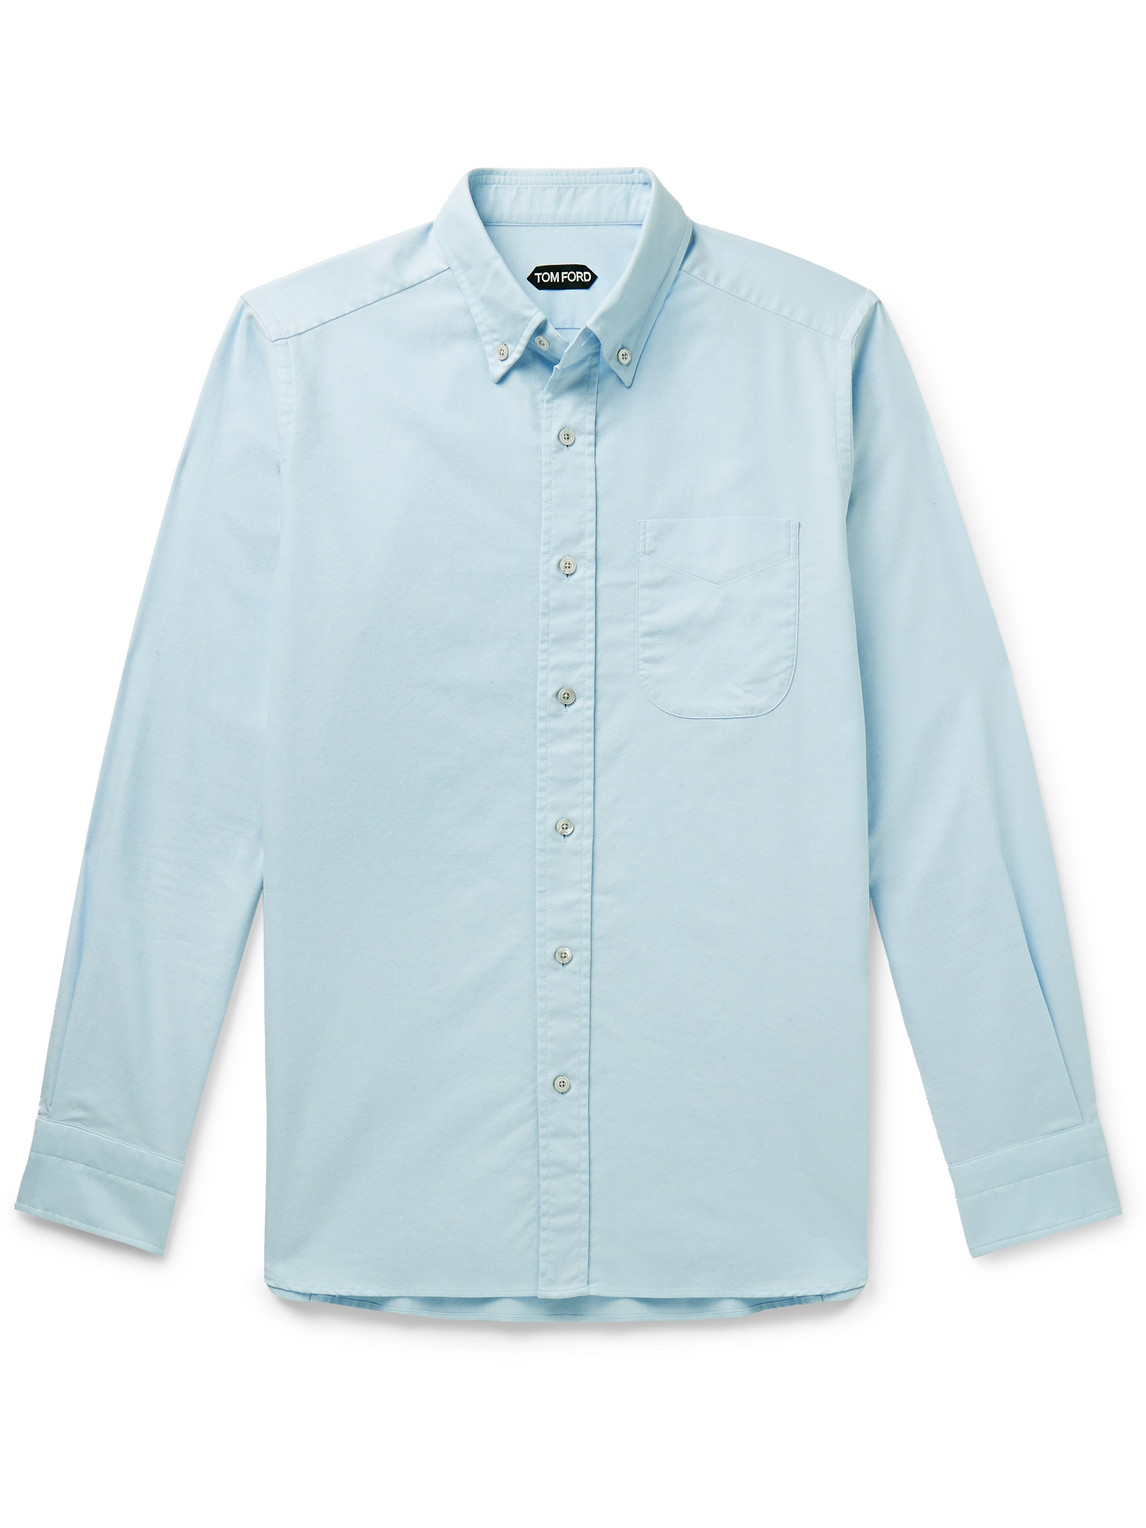 Tom Ford Button-down Collar Cotton Oxford Shirt In Blue